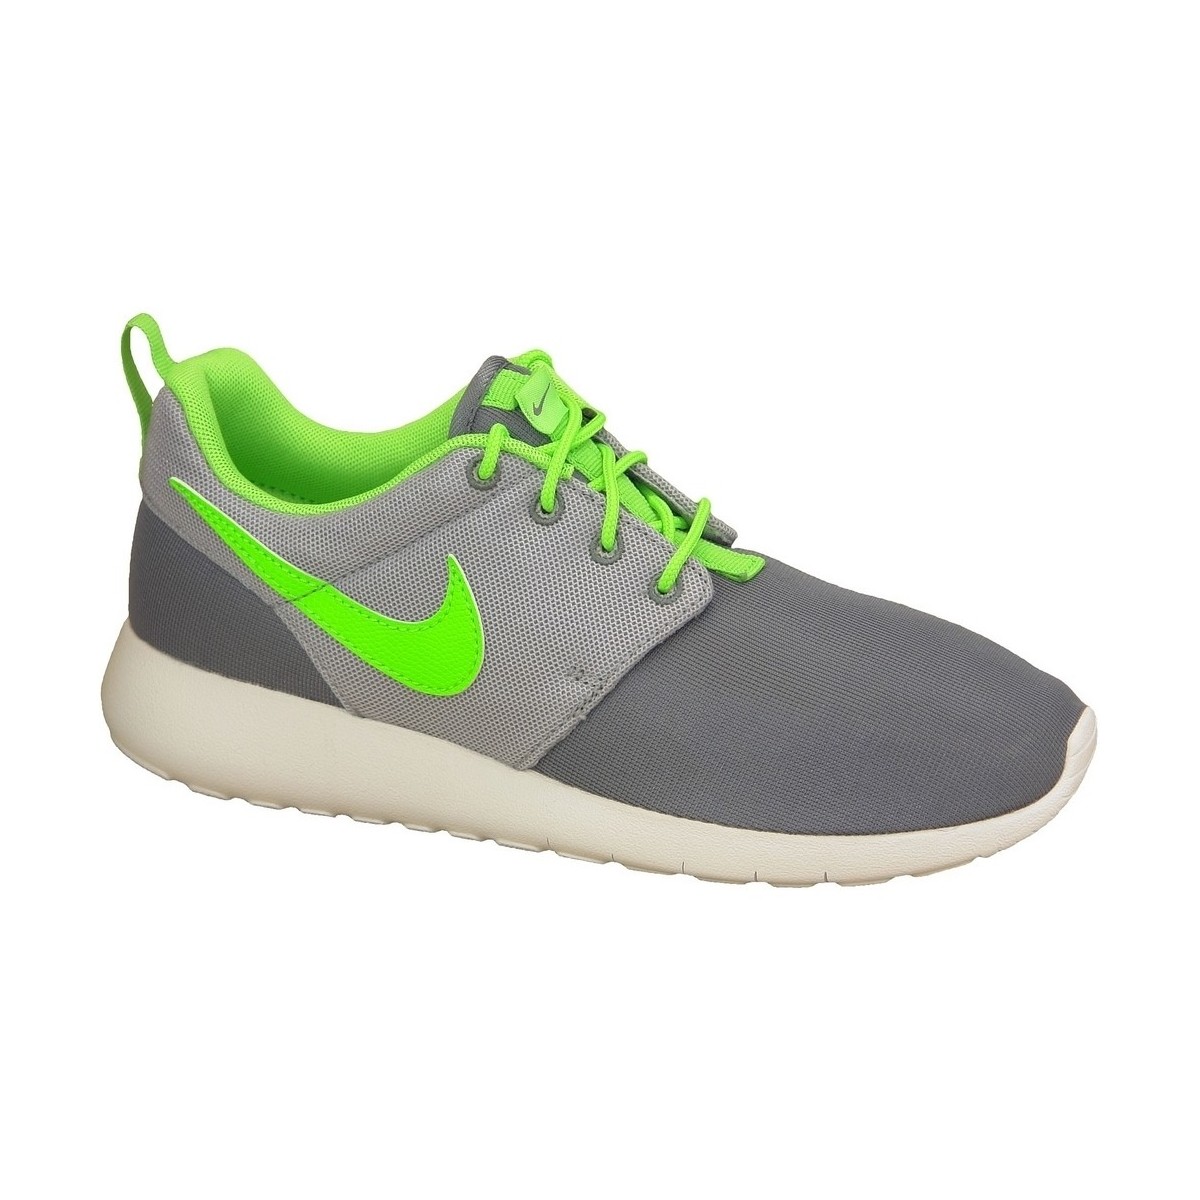 Topánky Chlapec Fitness Nike Roshe One Gs Biela